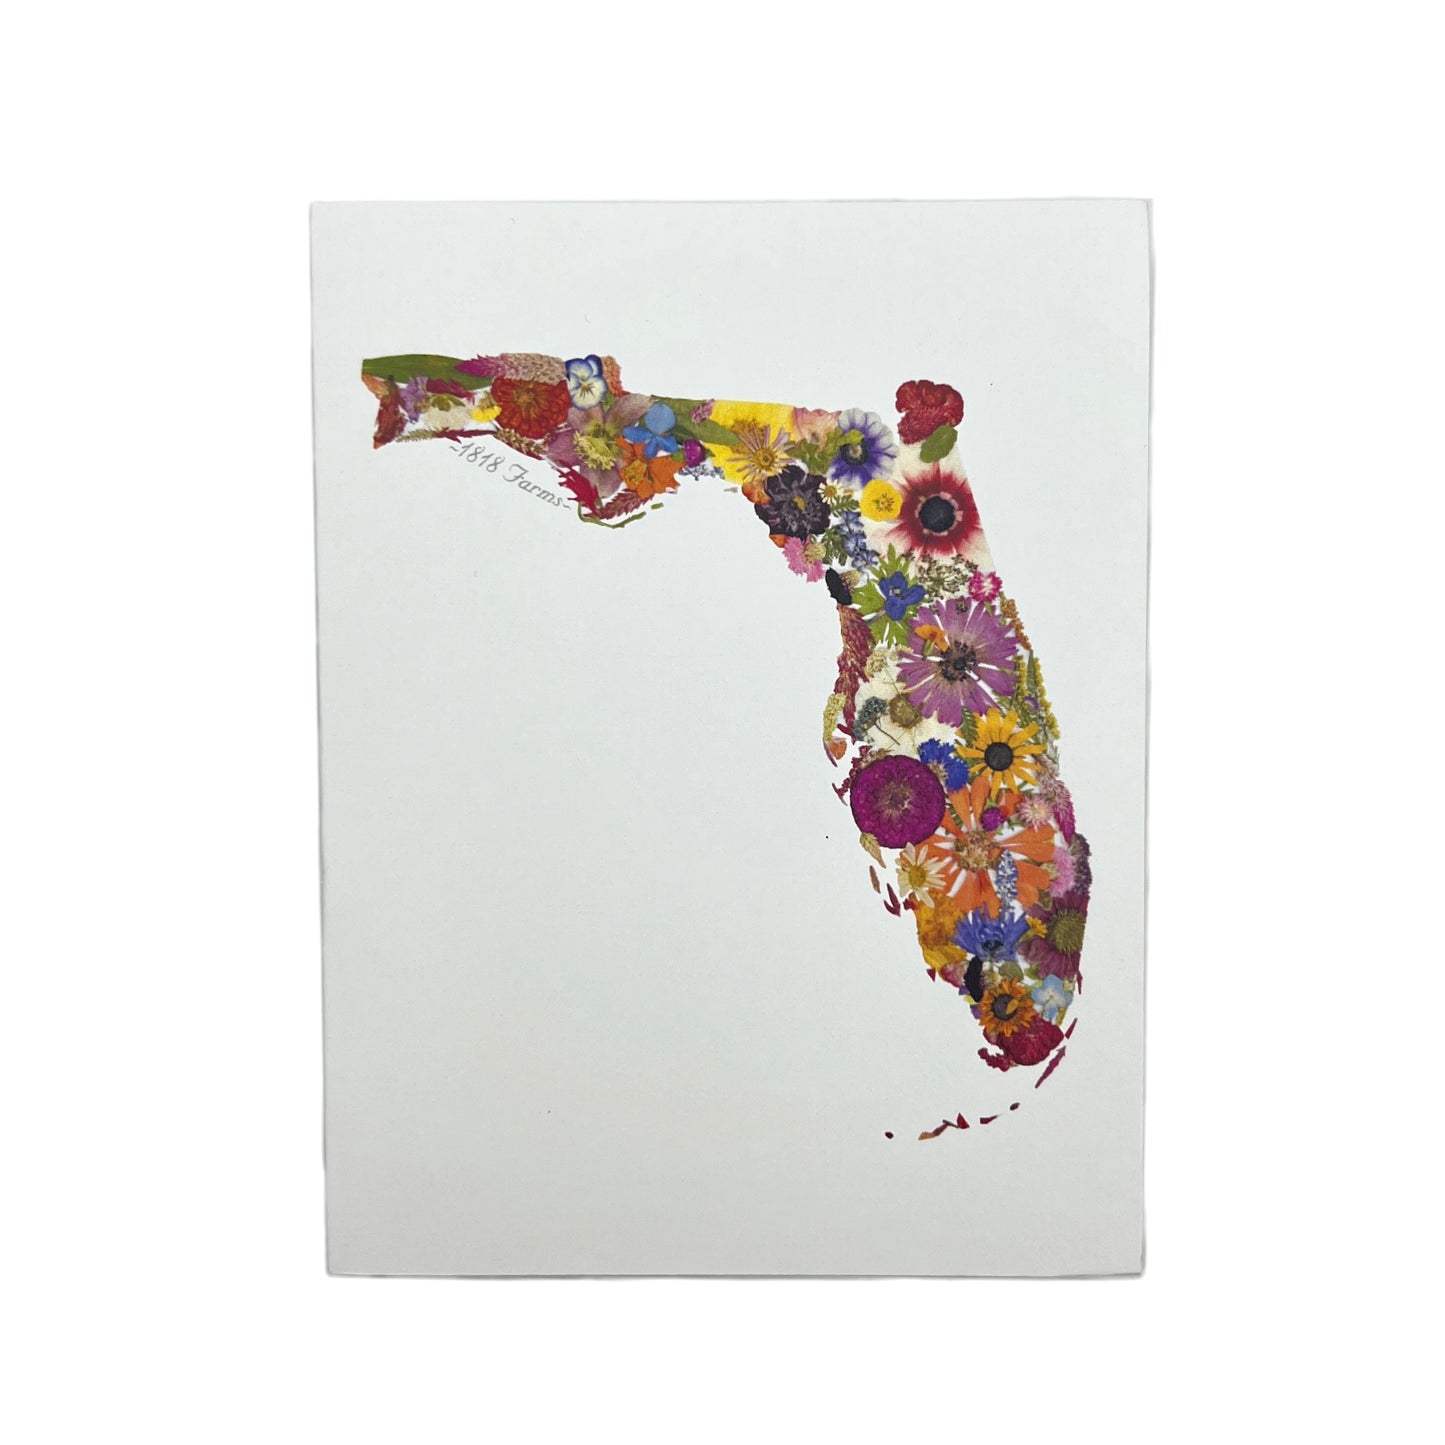 Florida Themed Notecards (Set of 6) Featuring Dried, Pressed Flowers - "Where I Bloom" Collection Notecard 1818 Farms   